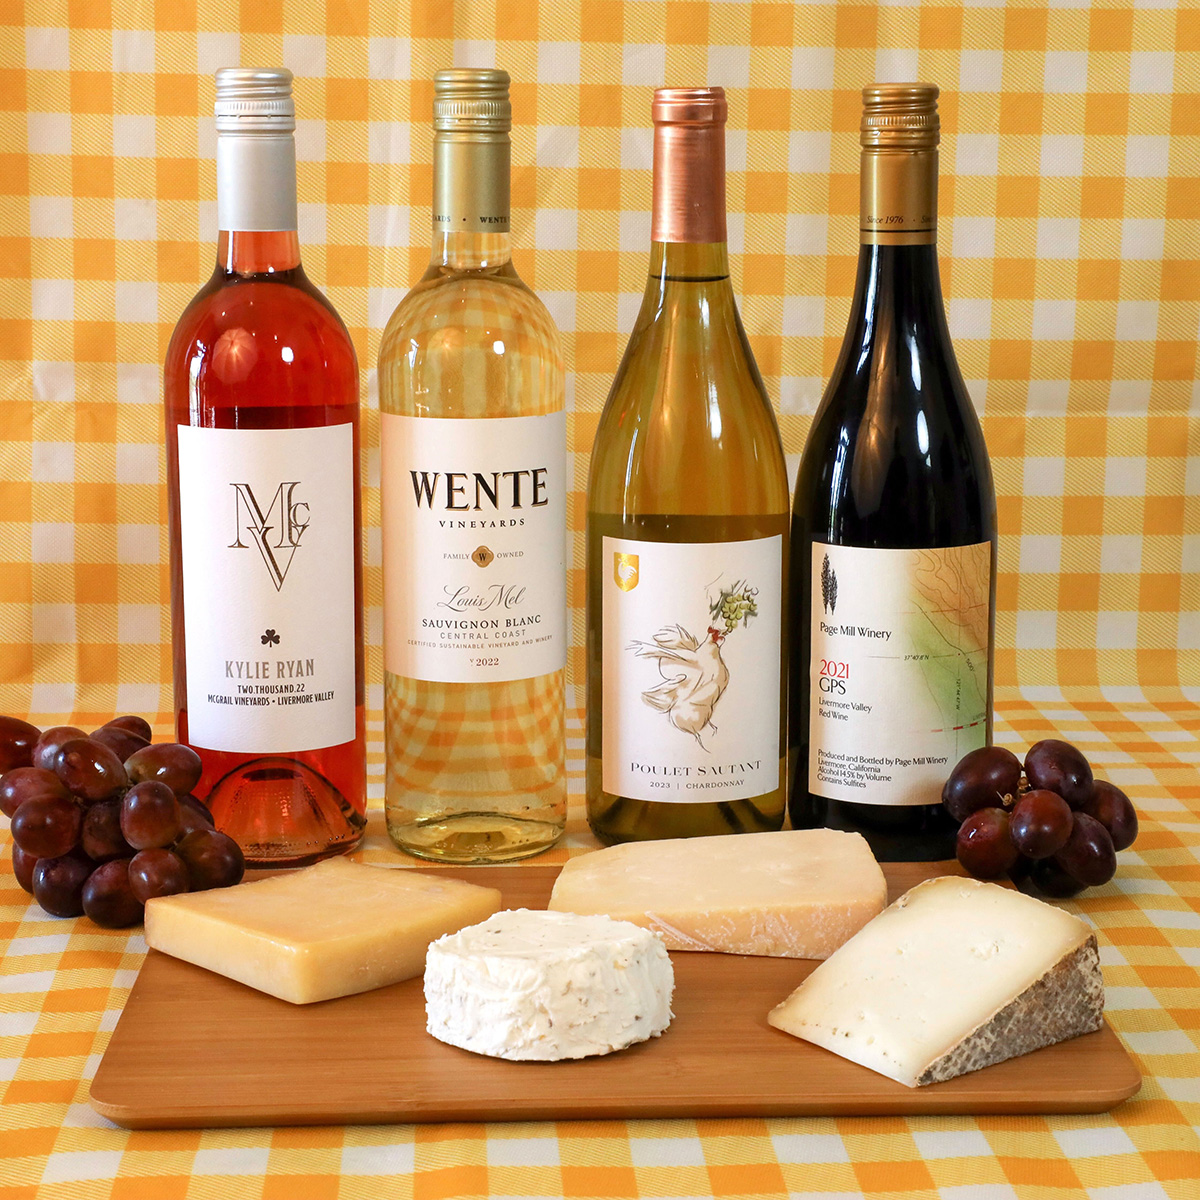 Cheese, Please! The Ultimate Wine and Cheese Pairings for Your Next Picnic